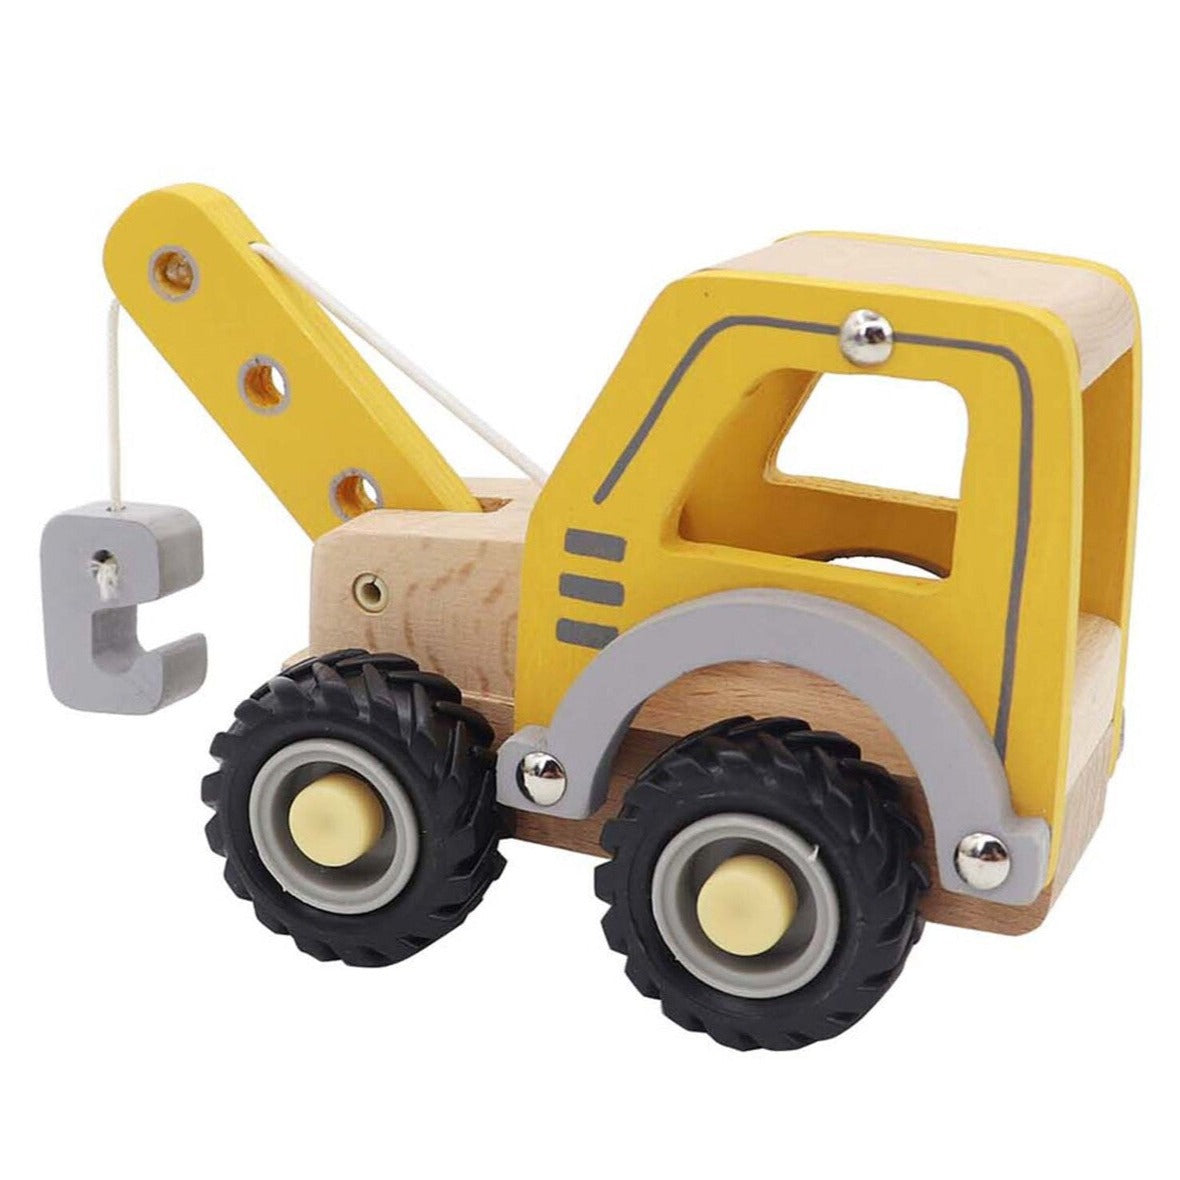 Wooden toy crane Truck - Angus & Dudley Collections